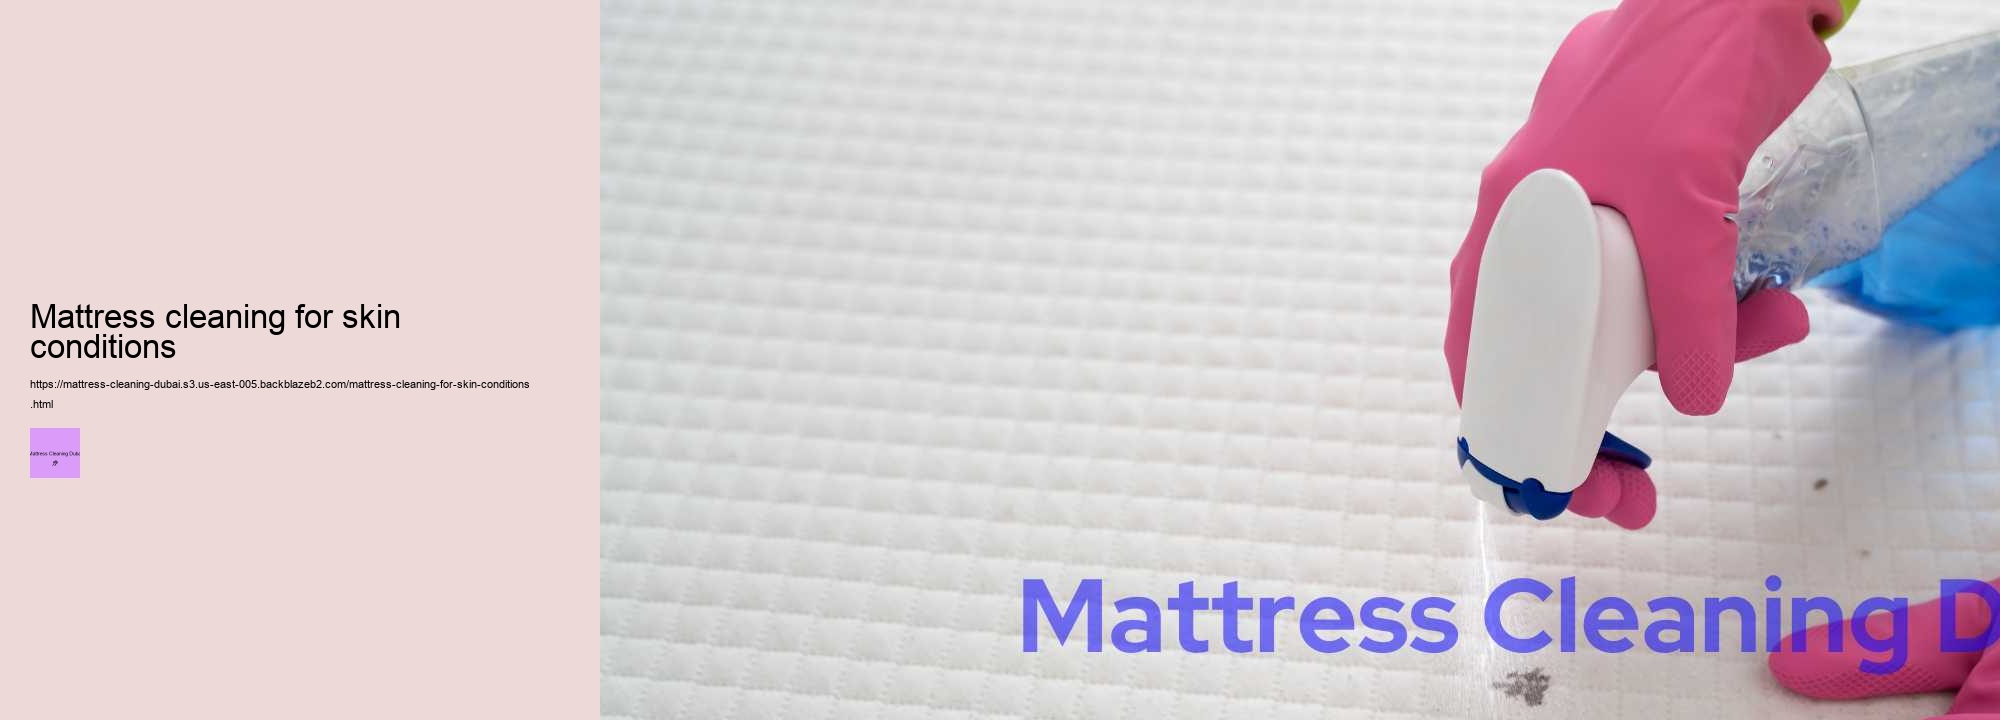 Mattress cleaning for skin conditions